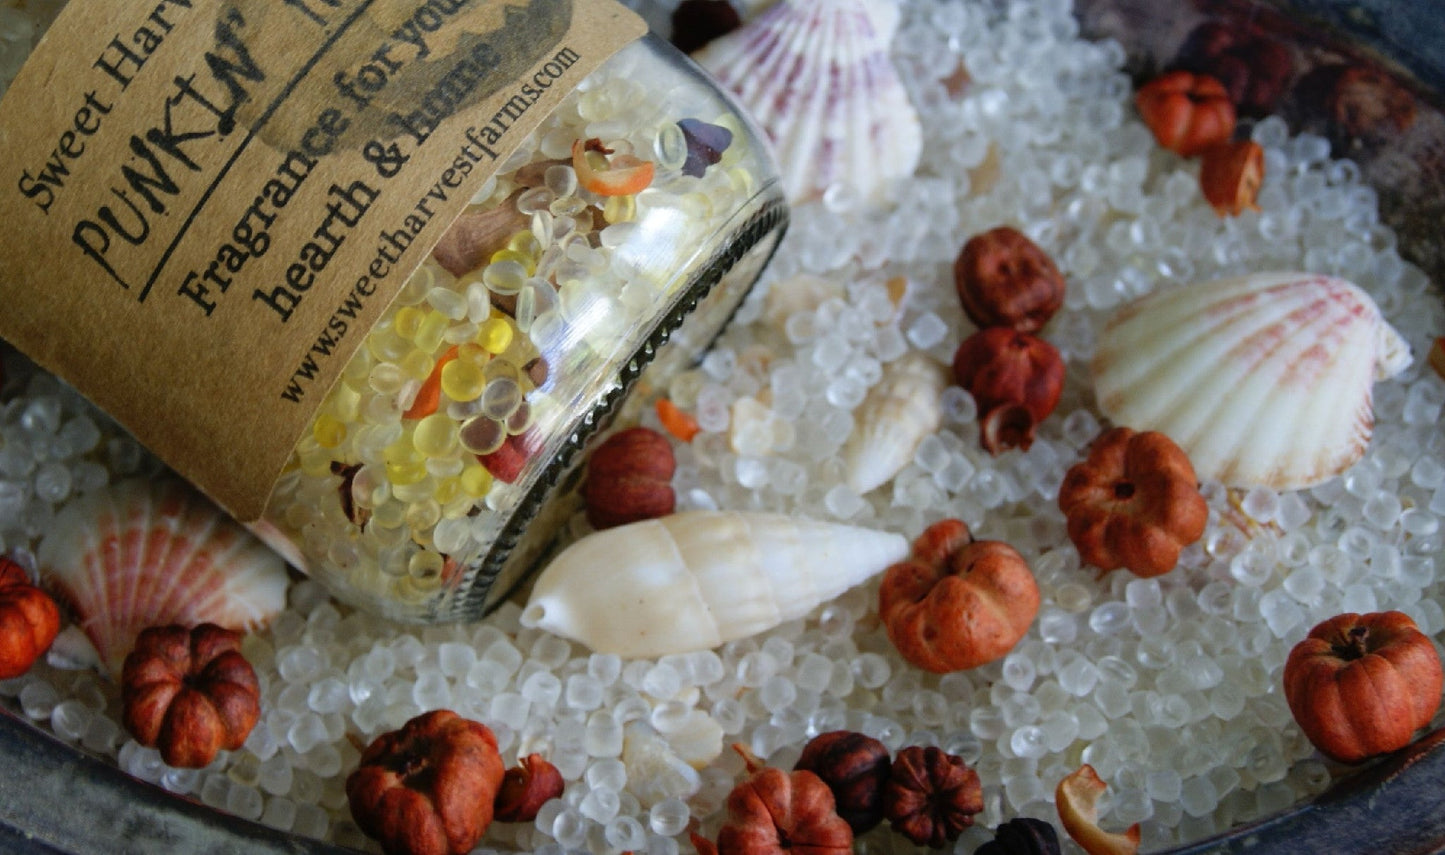 Punkin' Head Aroma Beads Potpourri - This jar of beads will last forever!